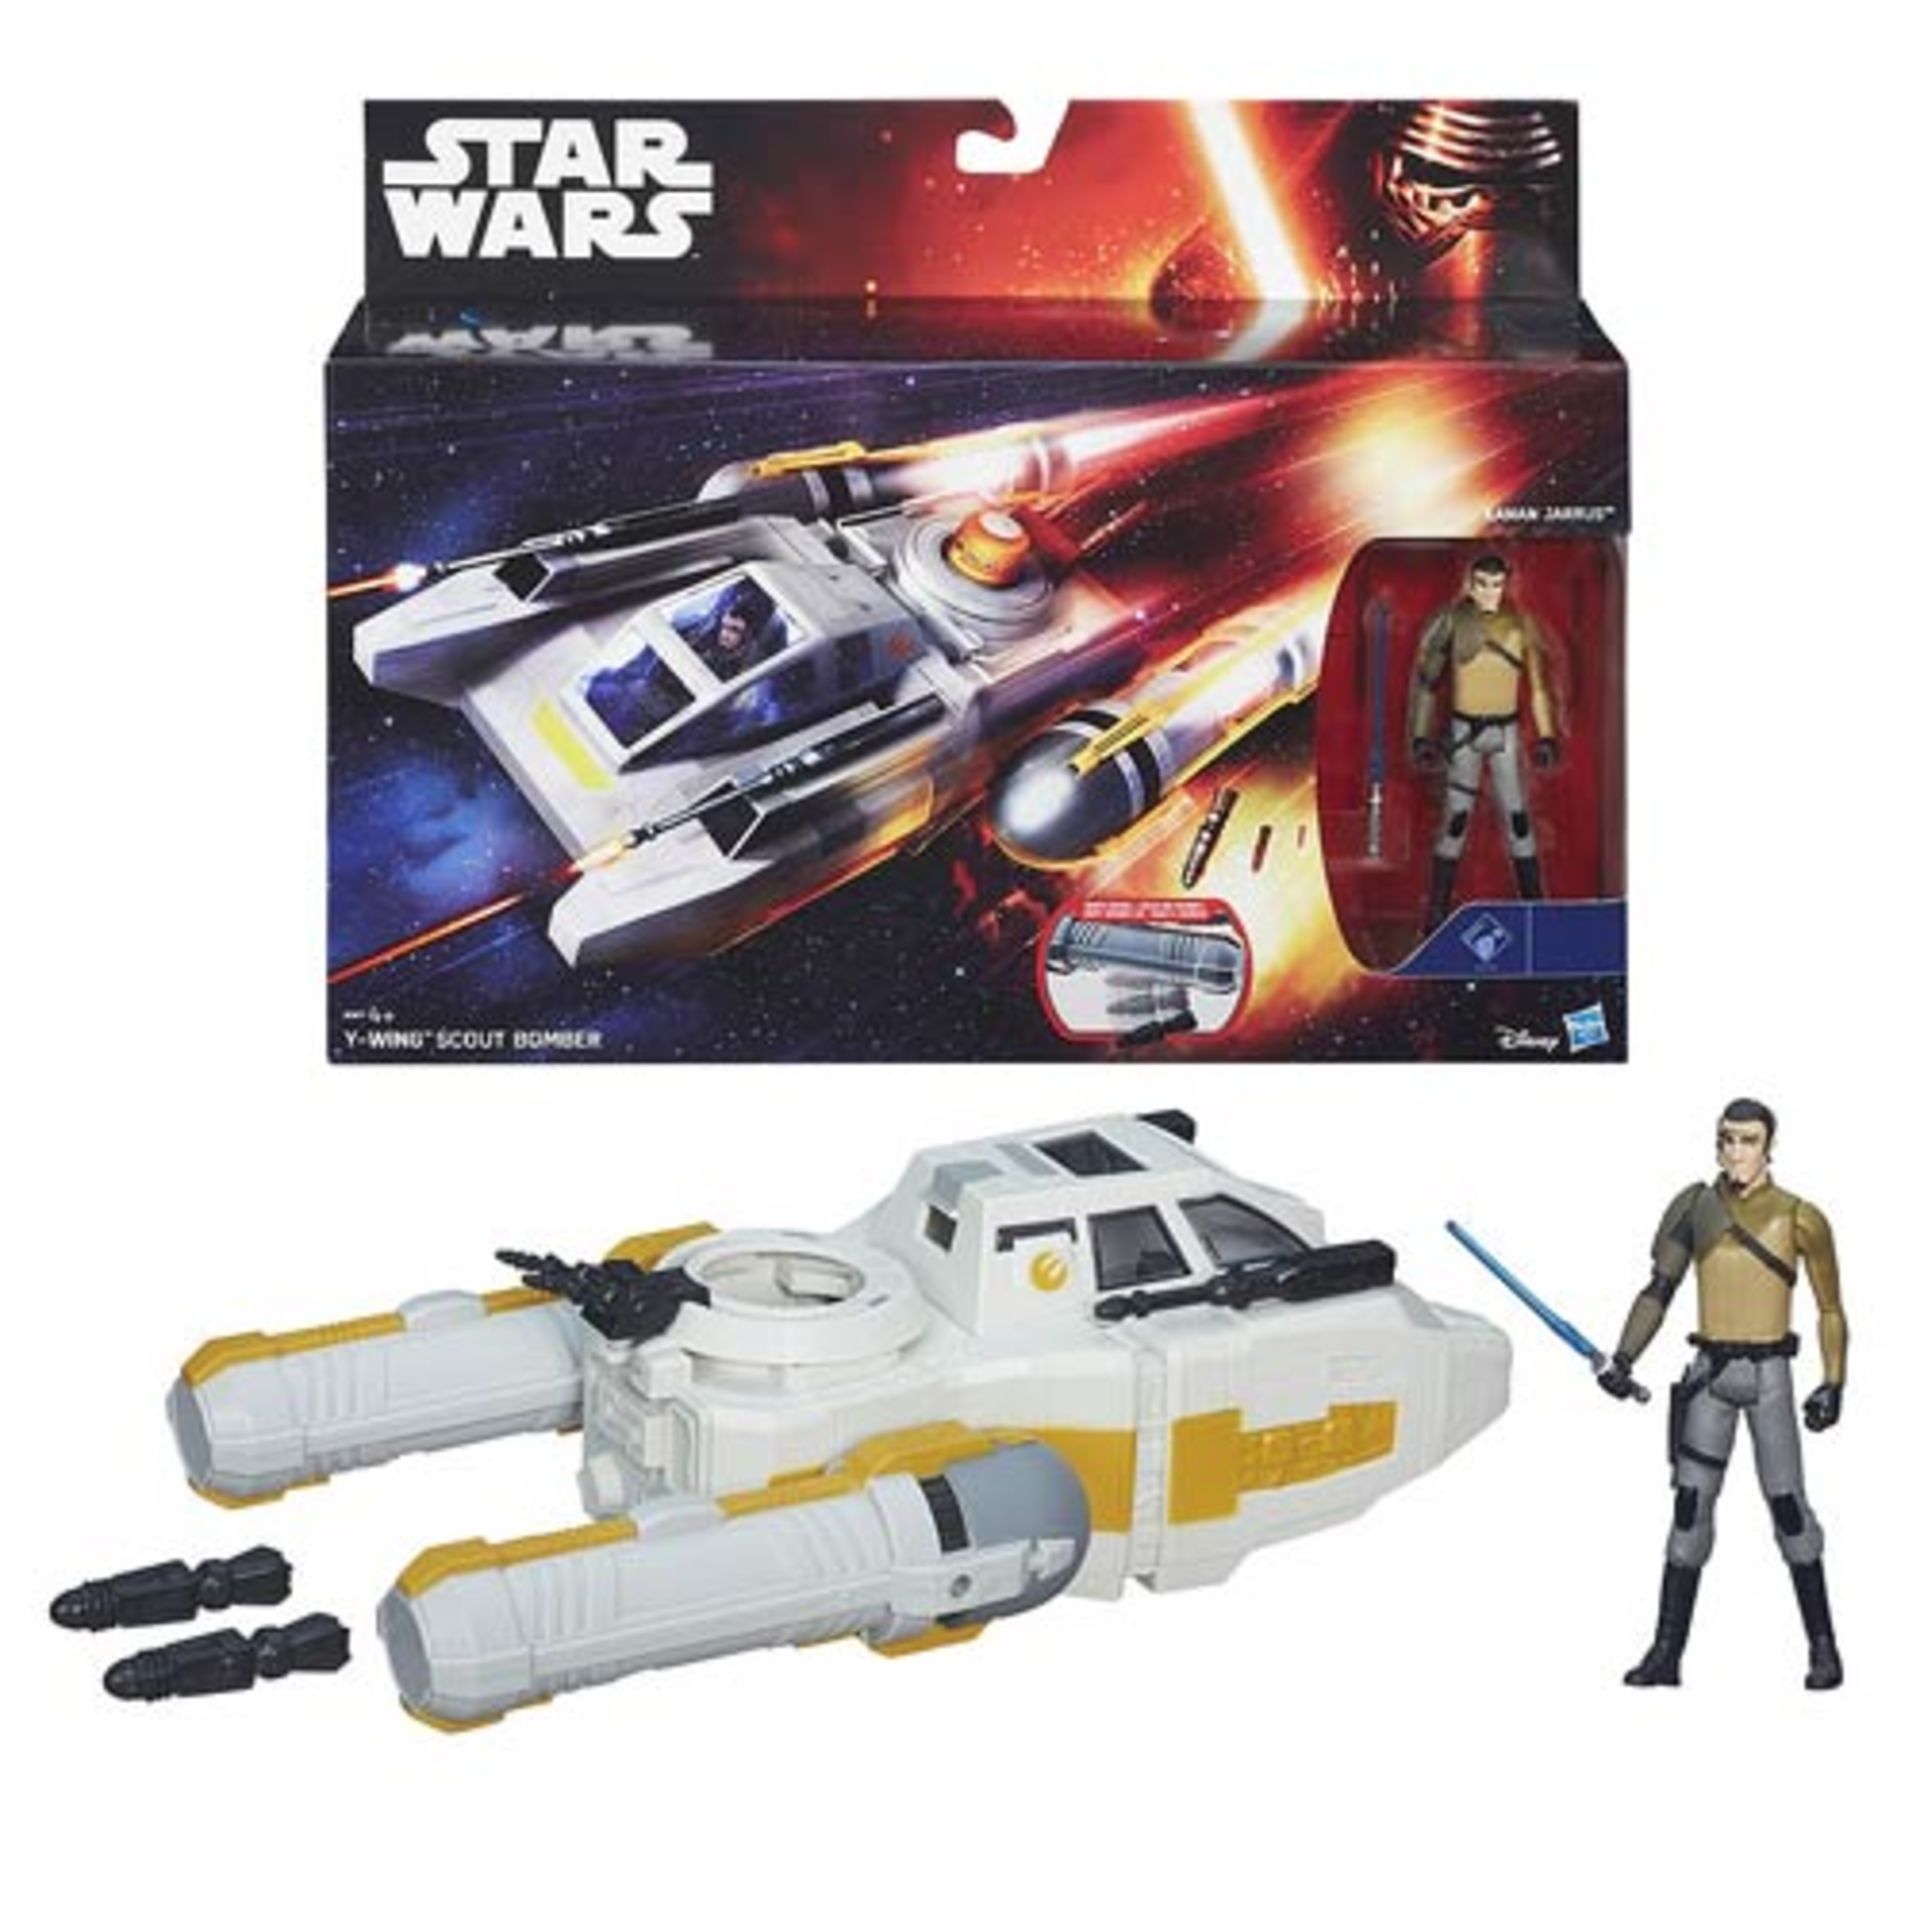 V Brand New Hasbro Star Wars Y-Wing Scout Bomber With Kanan Jarrus Figure - Drops Bombs - With